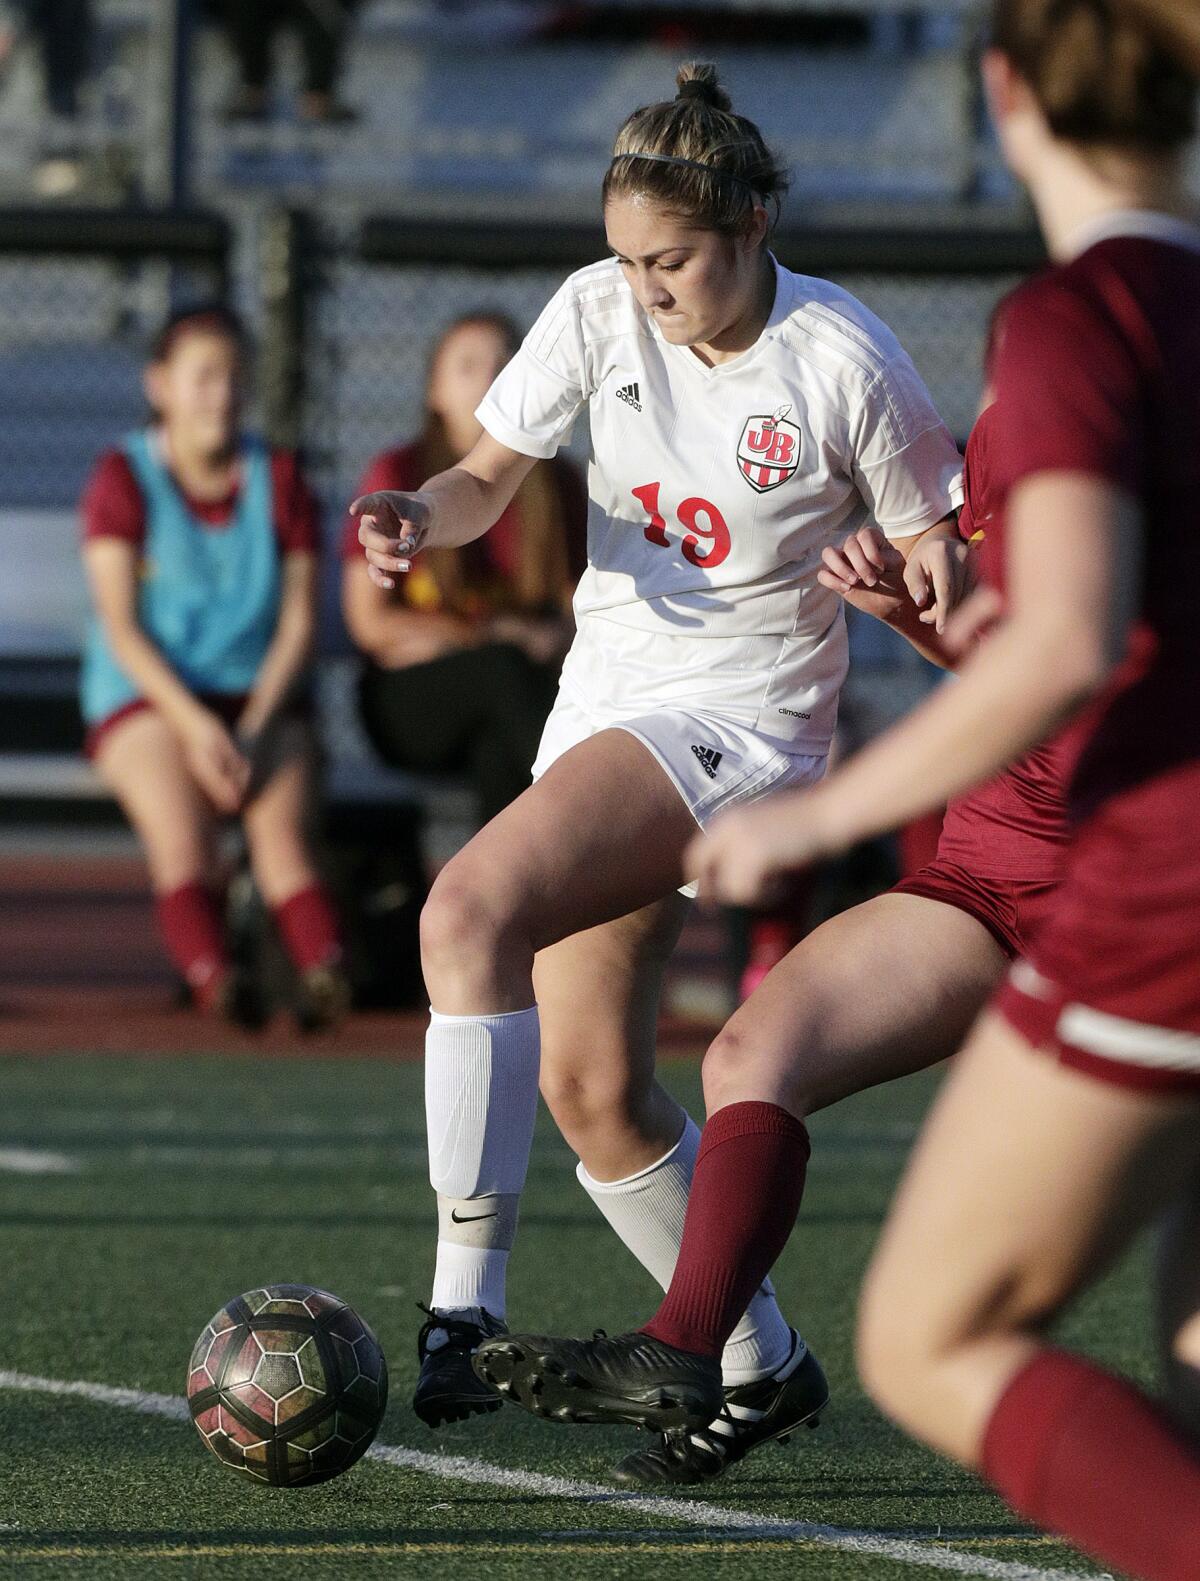 Burroughs' Stephanie Torres battles for control of the ball against Arcadia in a Pacific League girls' soccer game at Arcadia High School in Arcadia on Tuesday, January 28, 2020.